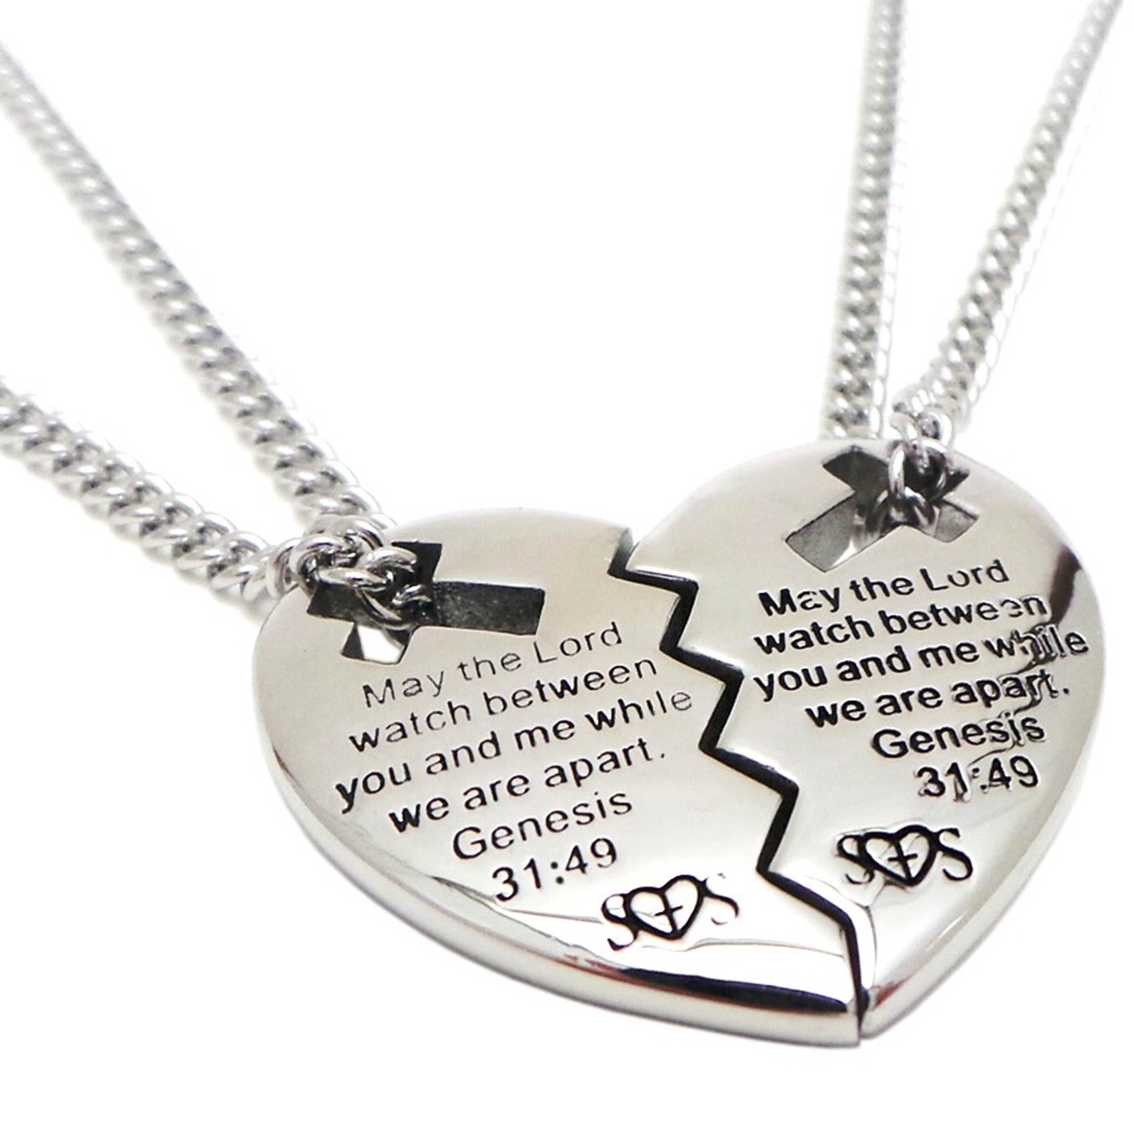 Shields of Strength Friends Stainless Steel Heart Cross Necklace Genesis 31:49 - Image 2 of 2